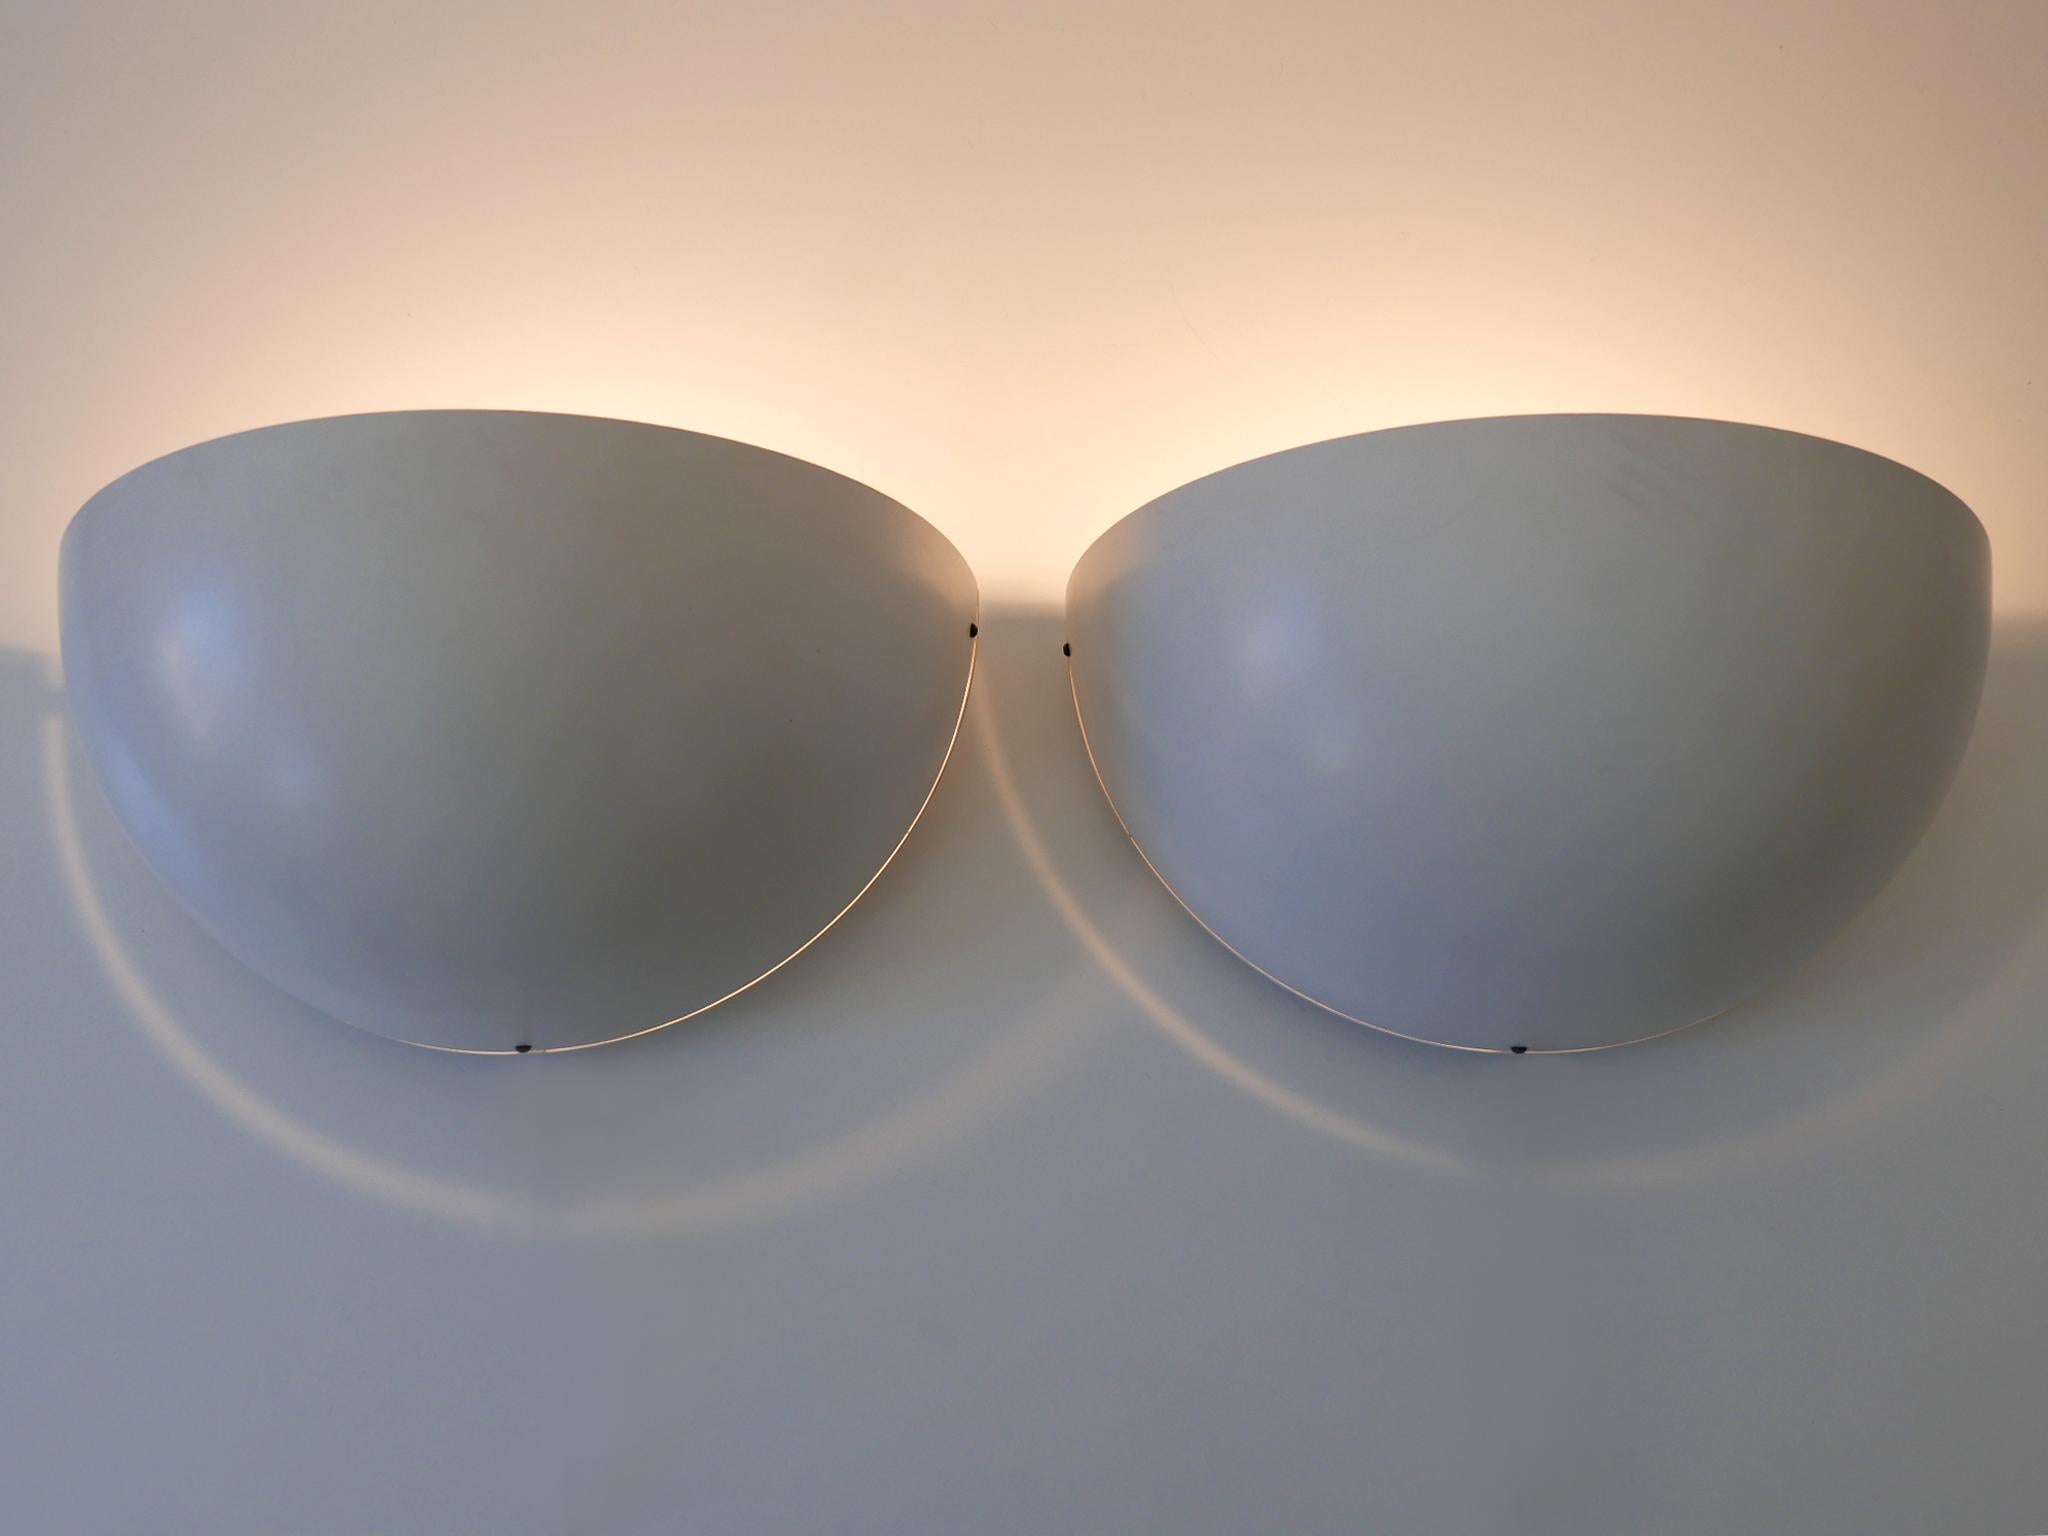 Set of two elegant minimalistic Mid-Century Modern sconces. Designed and manufactured in Germany, 1960s.

Executed in enameled aluminium, each sconce comes with 1 x E27 / E26 Edison screw fit bulb holder, is rewired, in working condition and runs